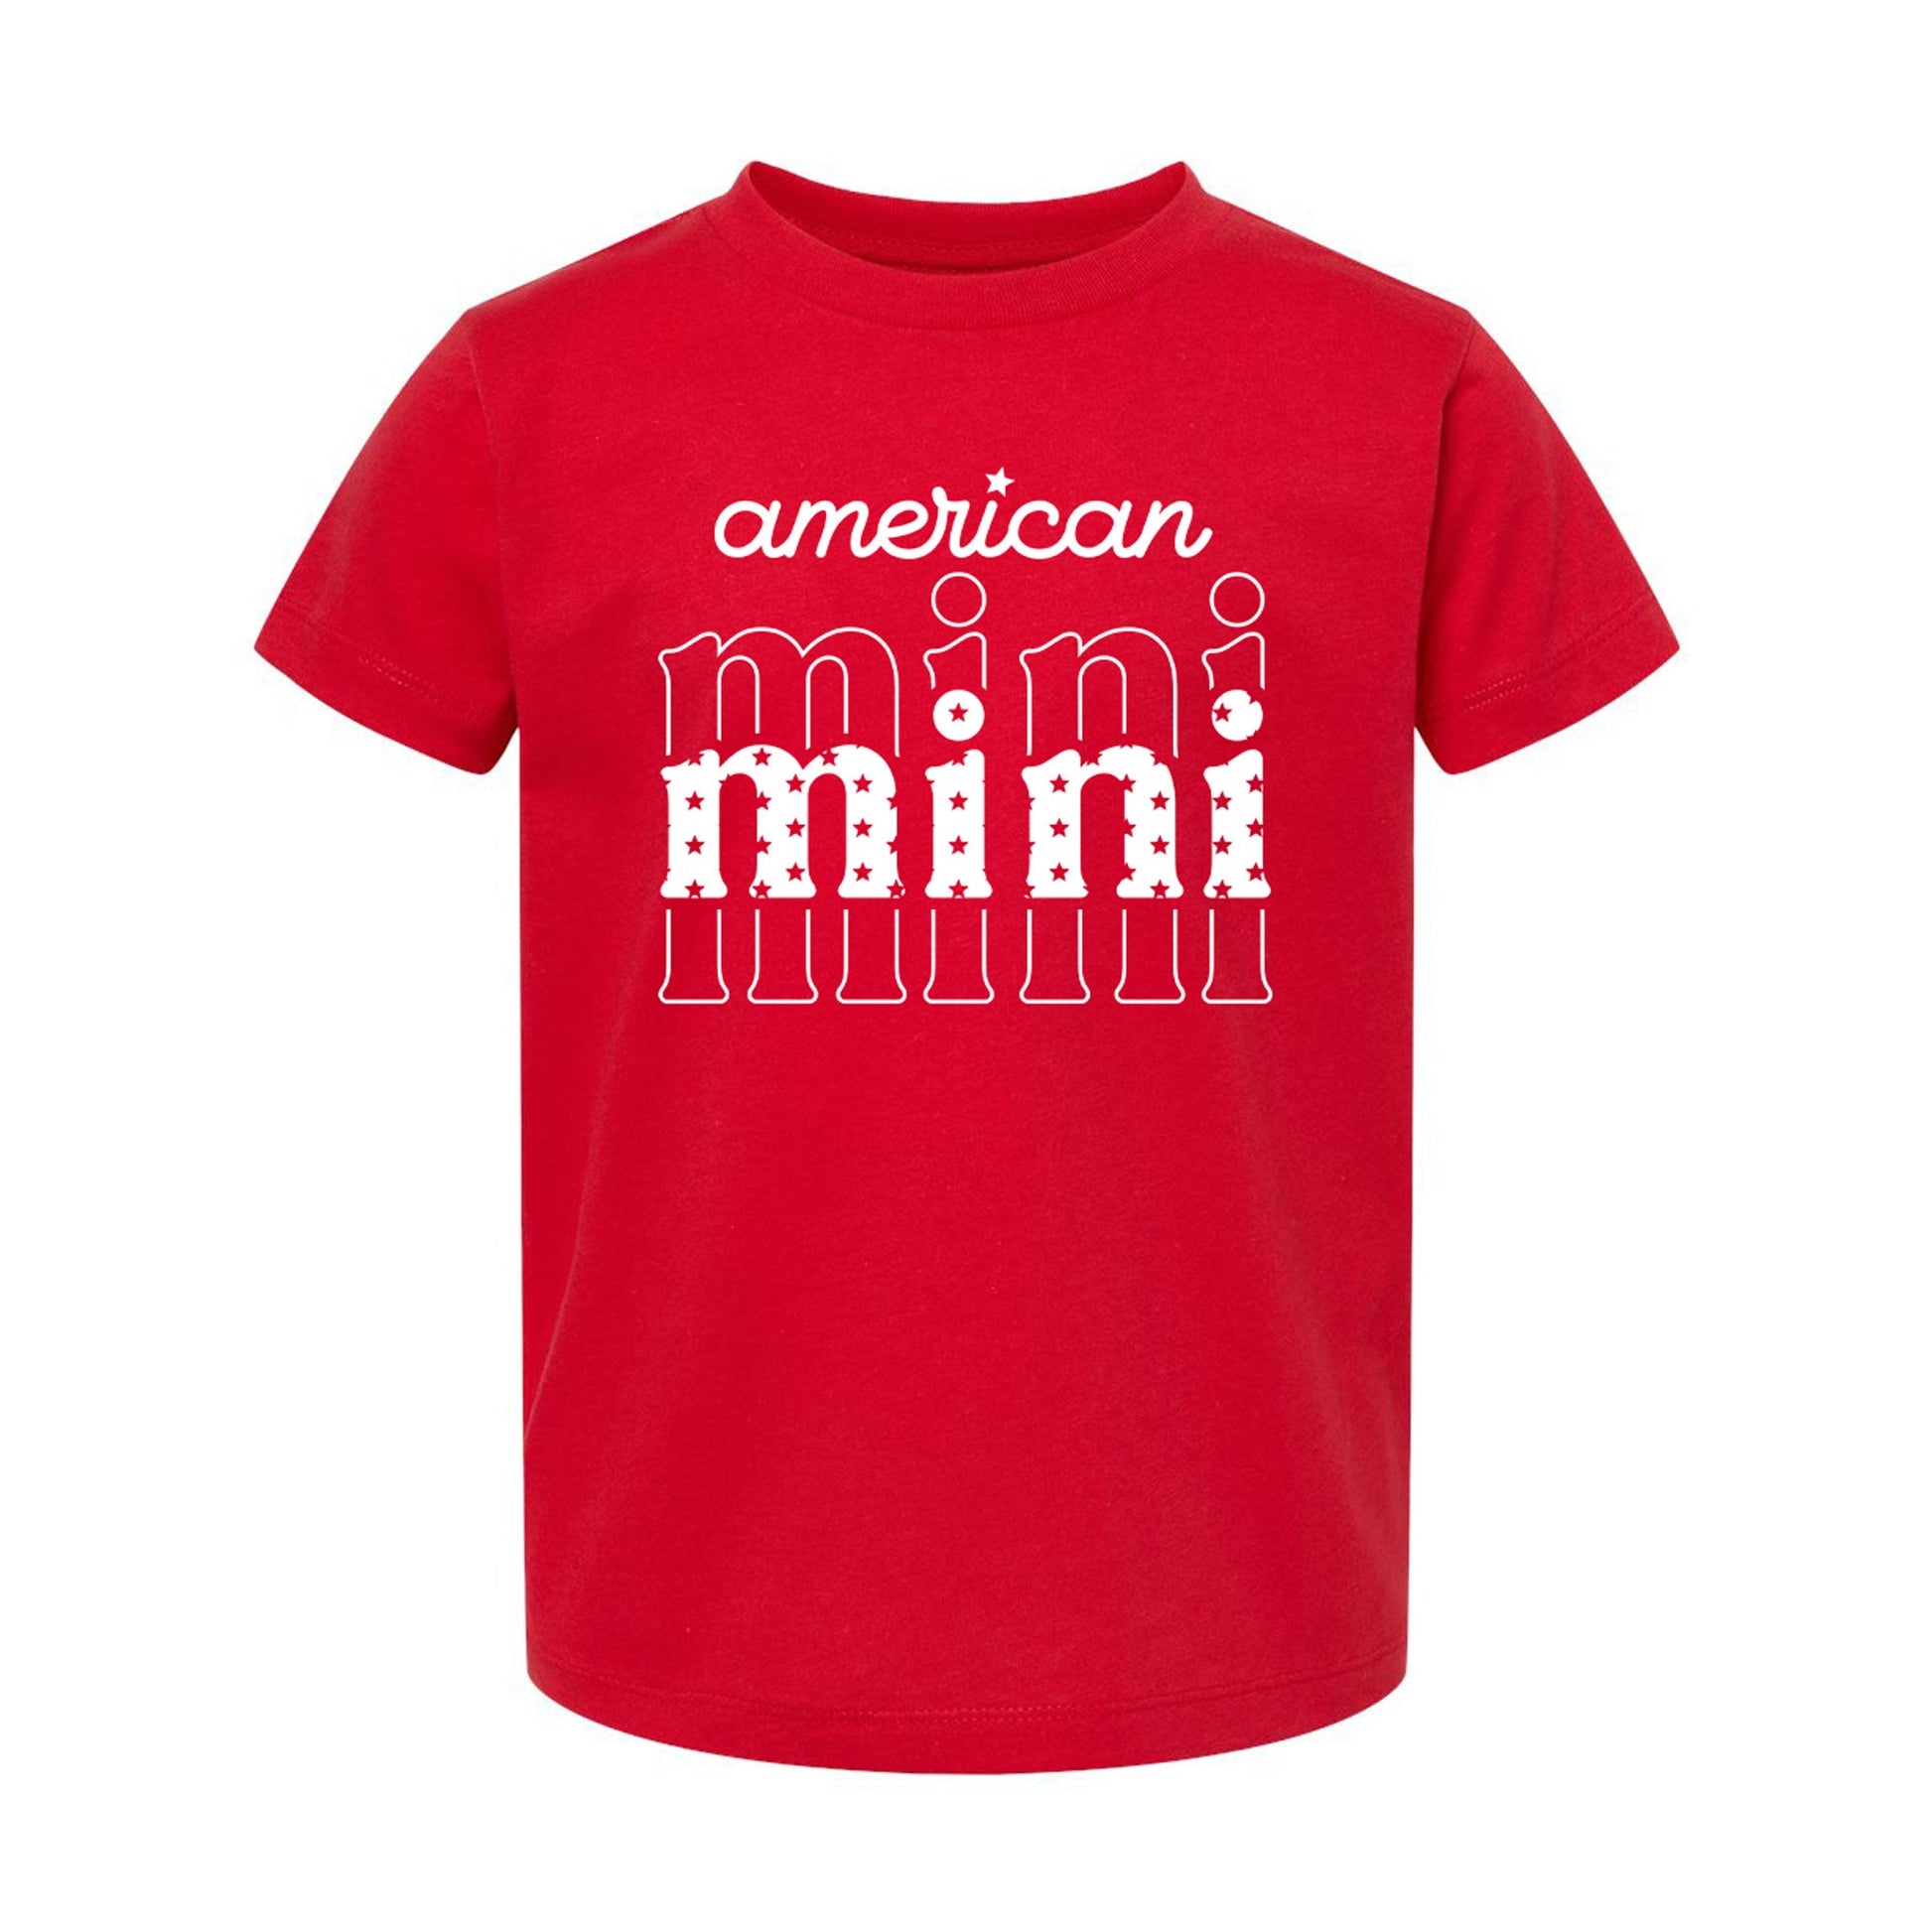 american mini white printed design on a red t-shirt